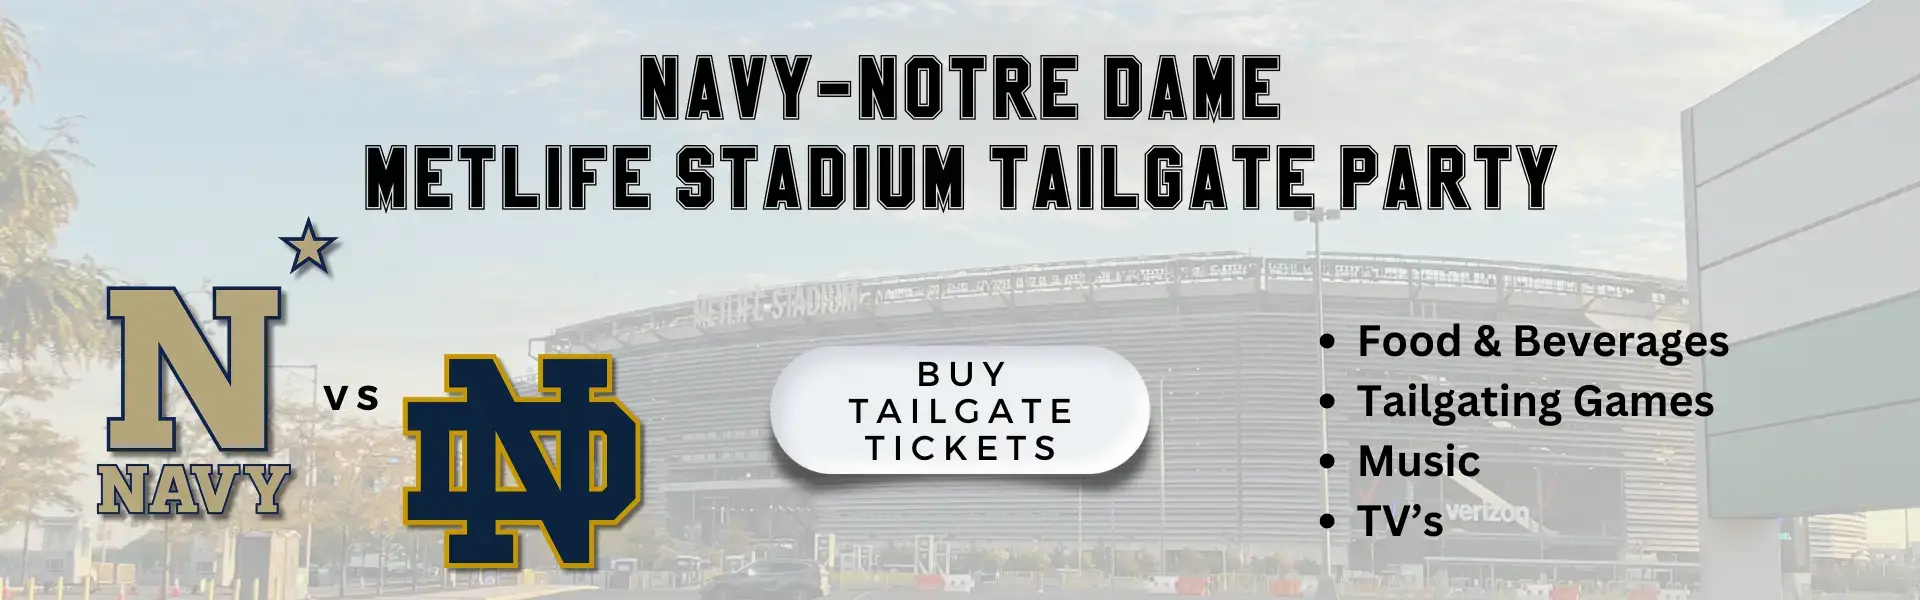 NAVY-NOTRE DAME MetLife Stadium Tailgate Party